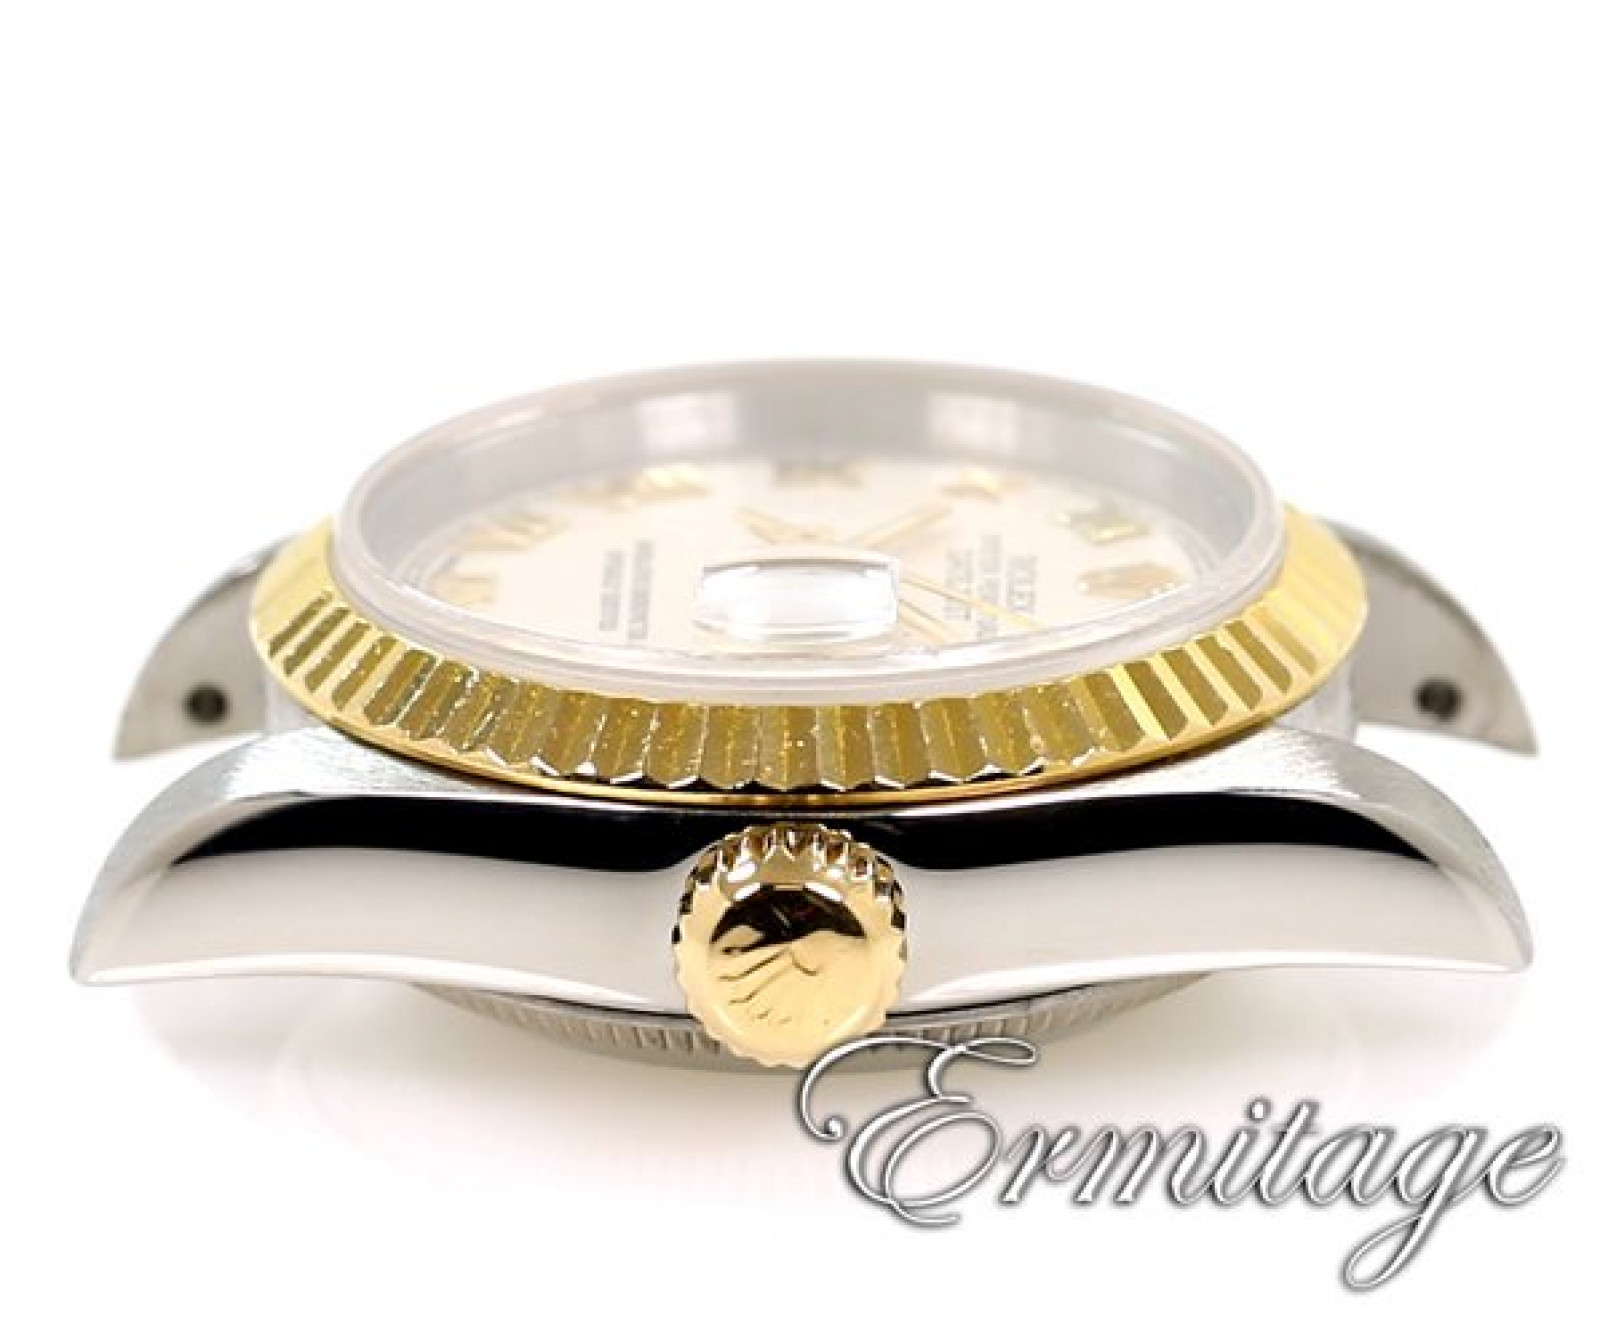 Rolex Datejust 69173 Gold & Steel with White Dial Year 1998